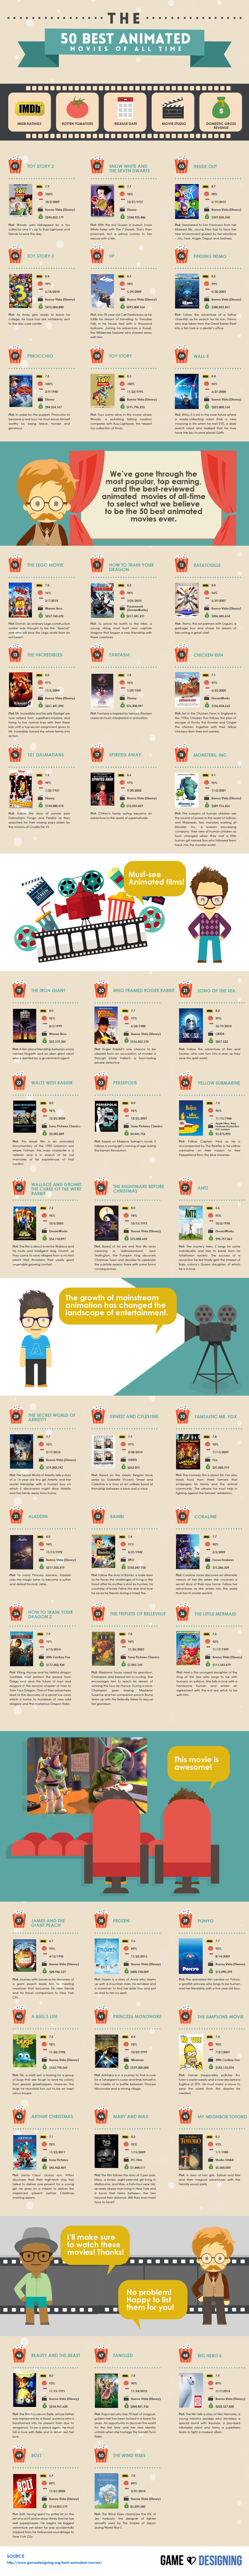 The 50 Best Animated Movies of All Time [Infographic]